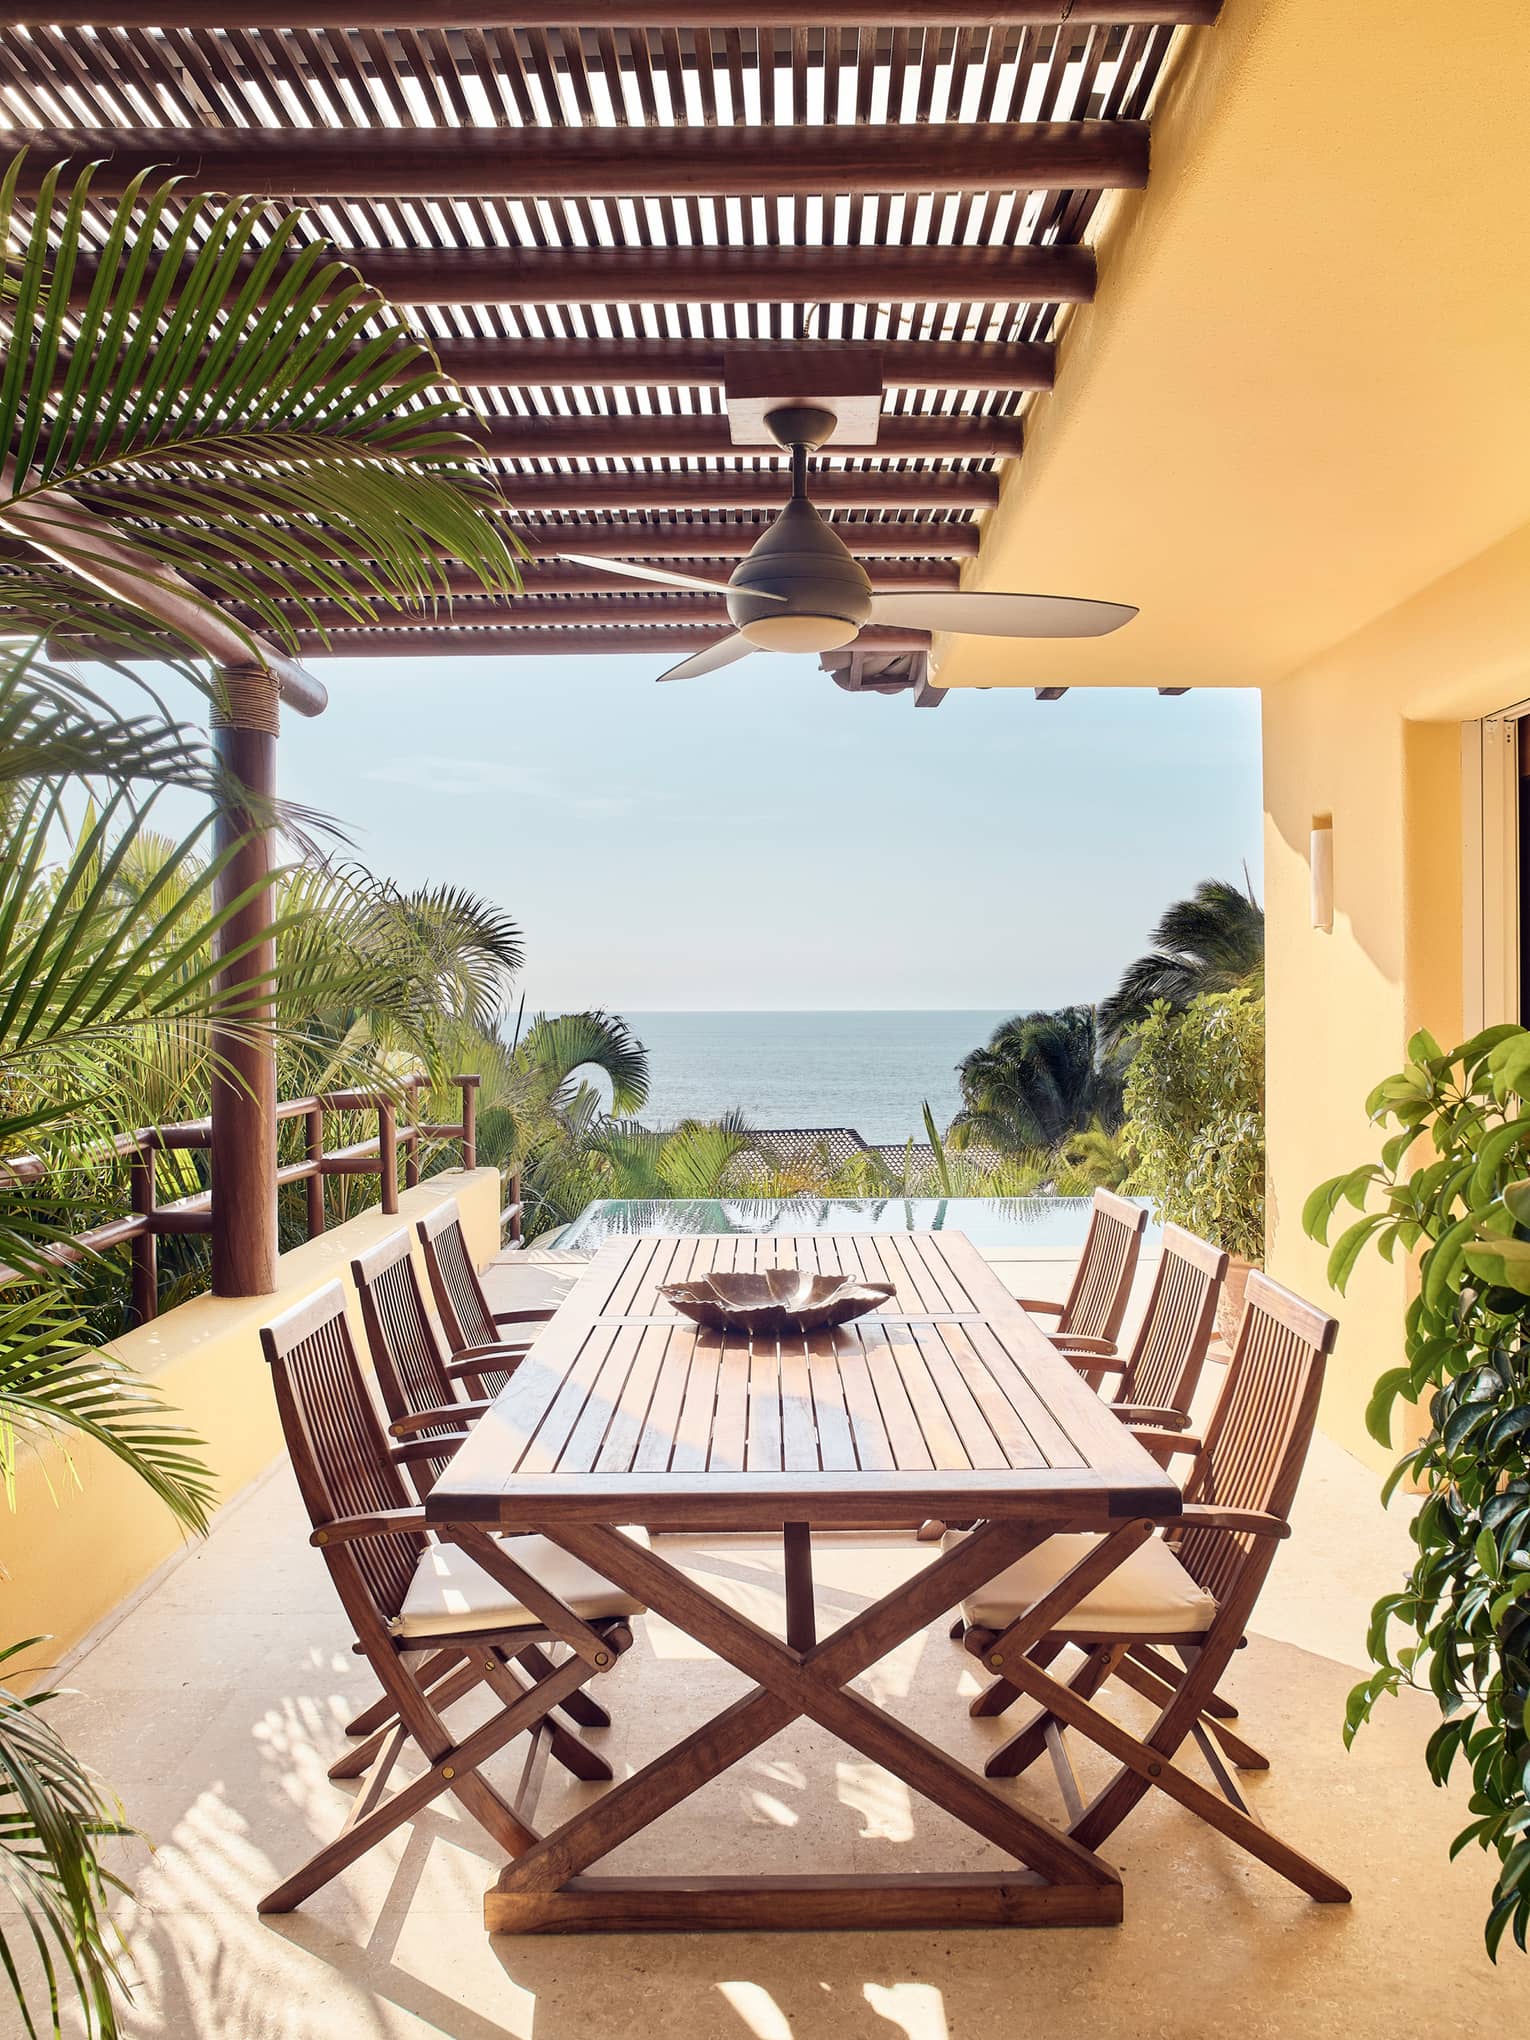 Wood patio table, chairs under pergola and ceiling fan, ocean views